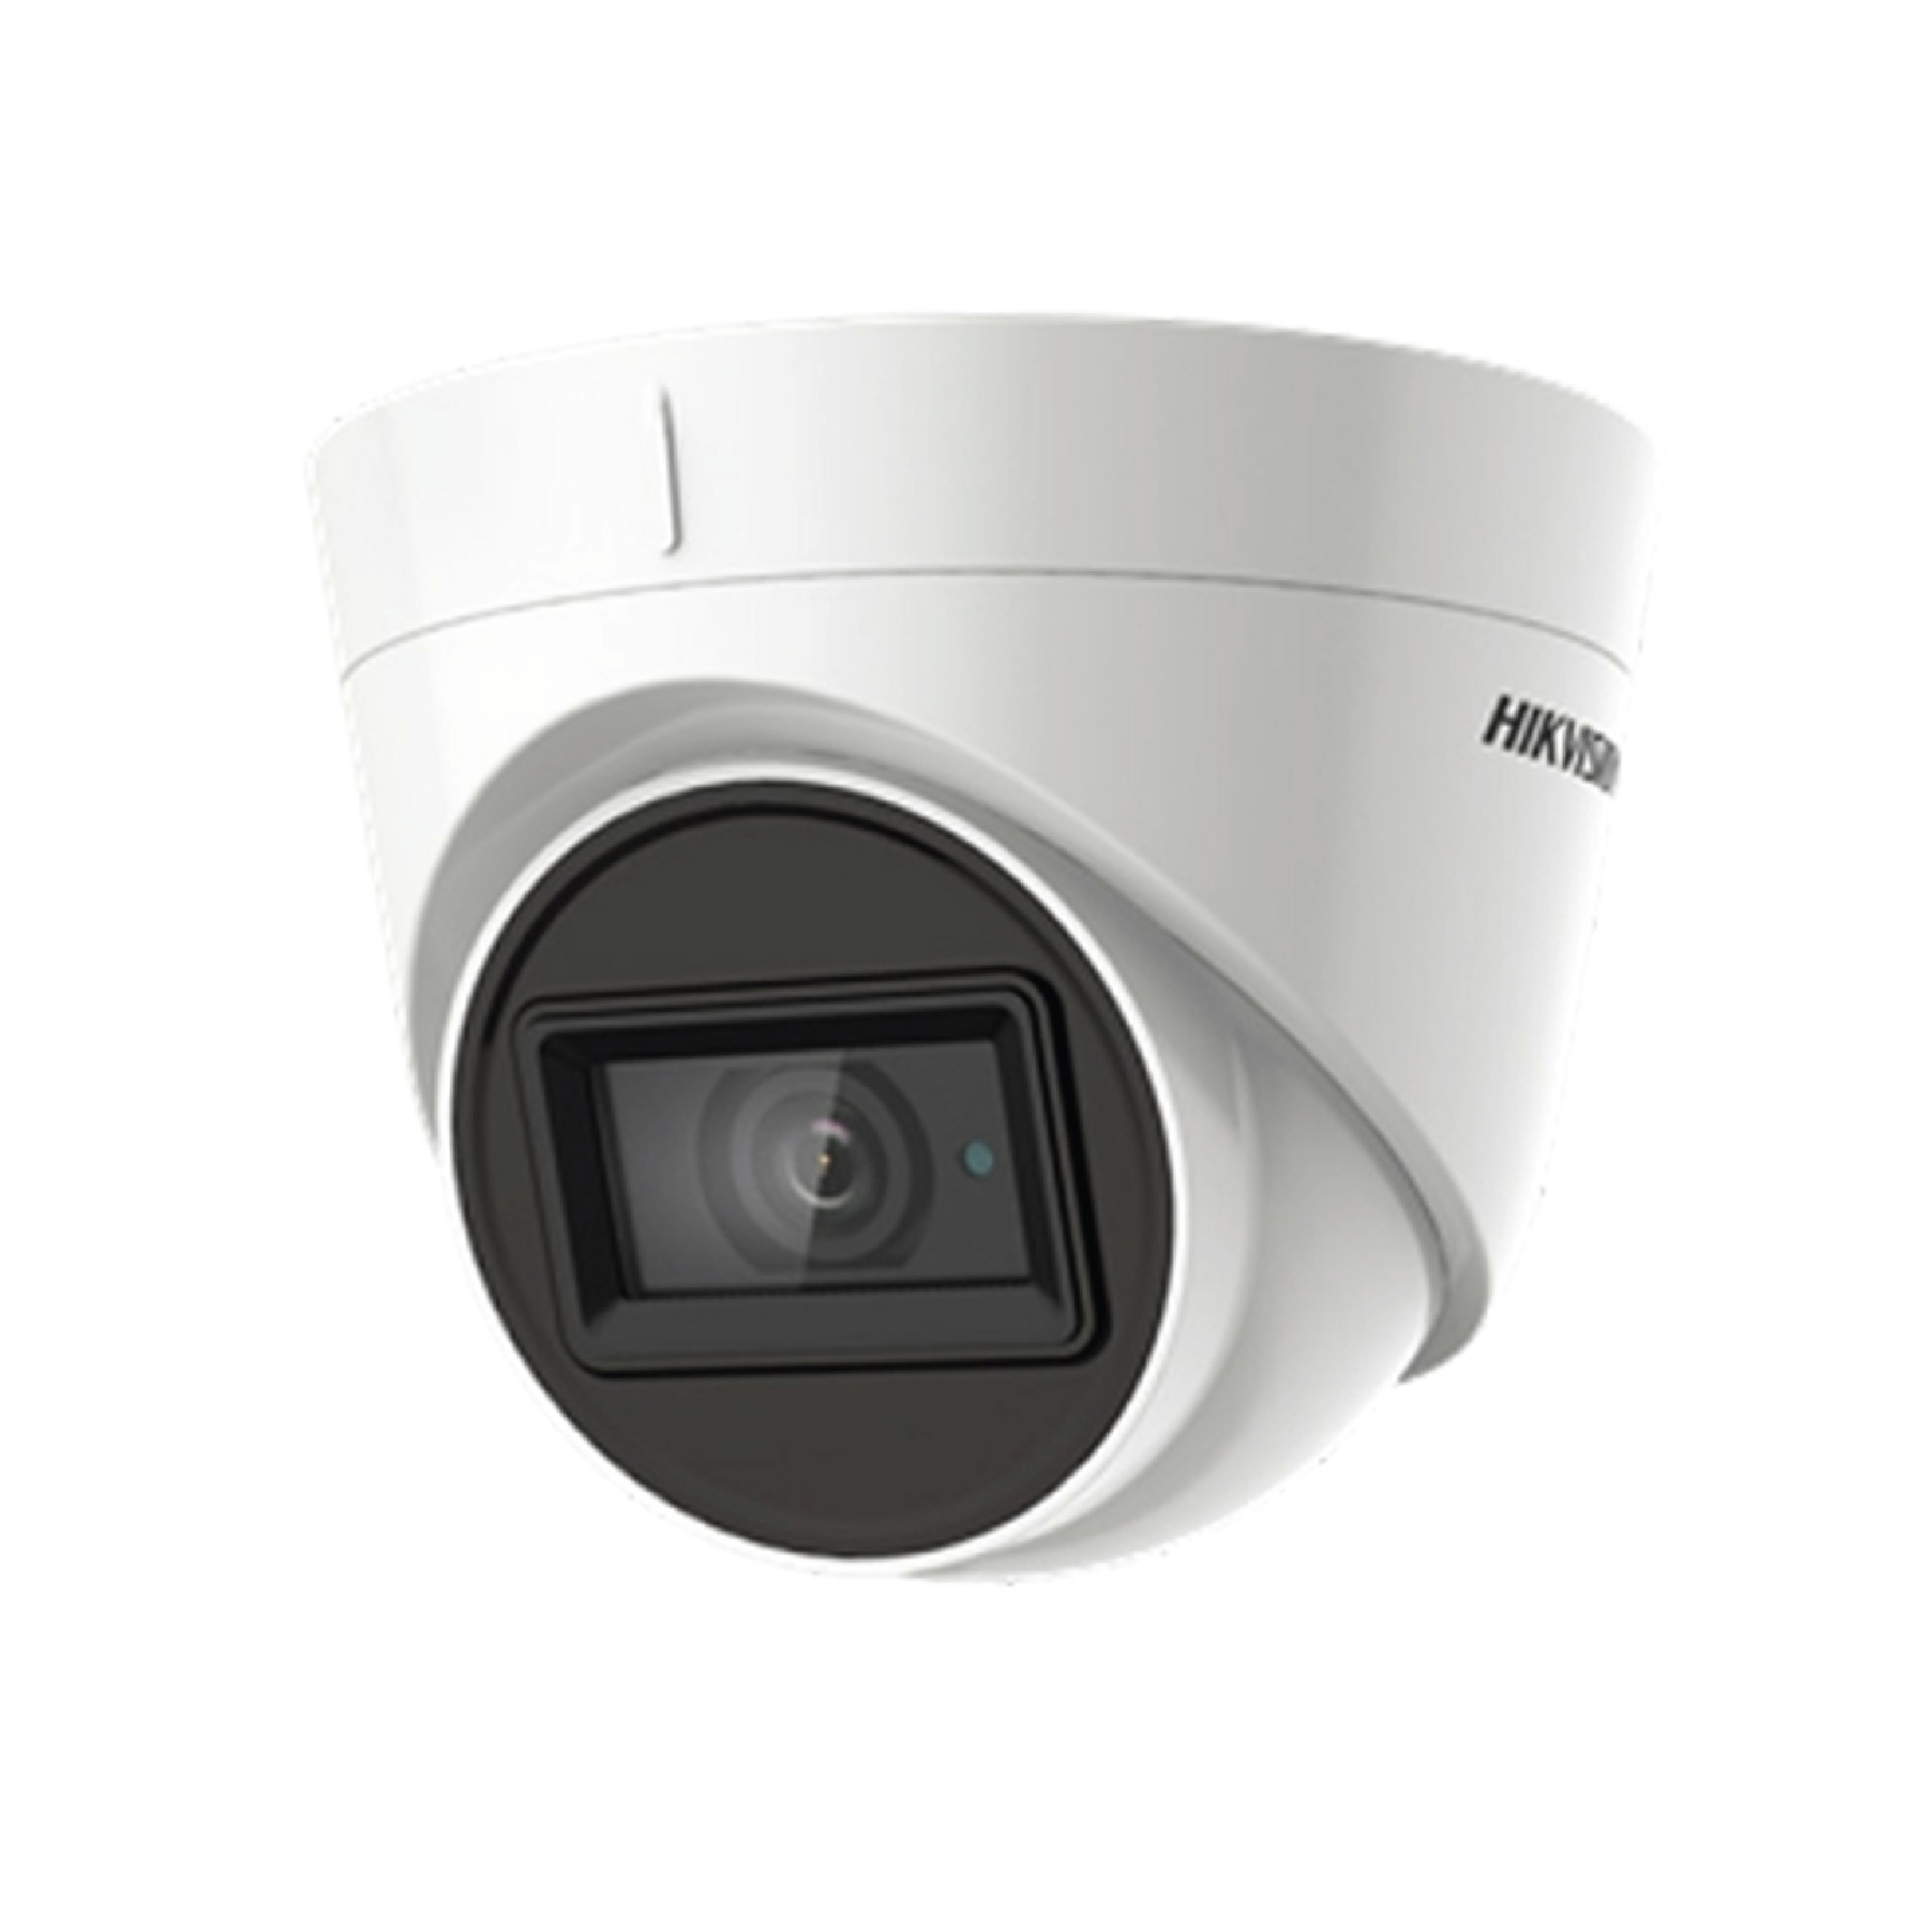 HIKVISION DS-2CE78D3T-IT3F Turbo HD Camera